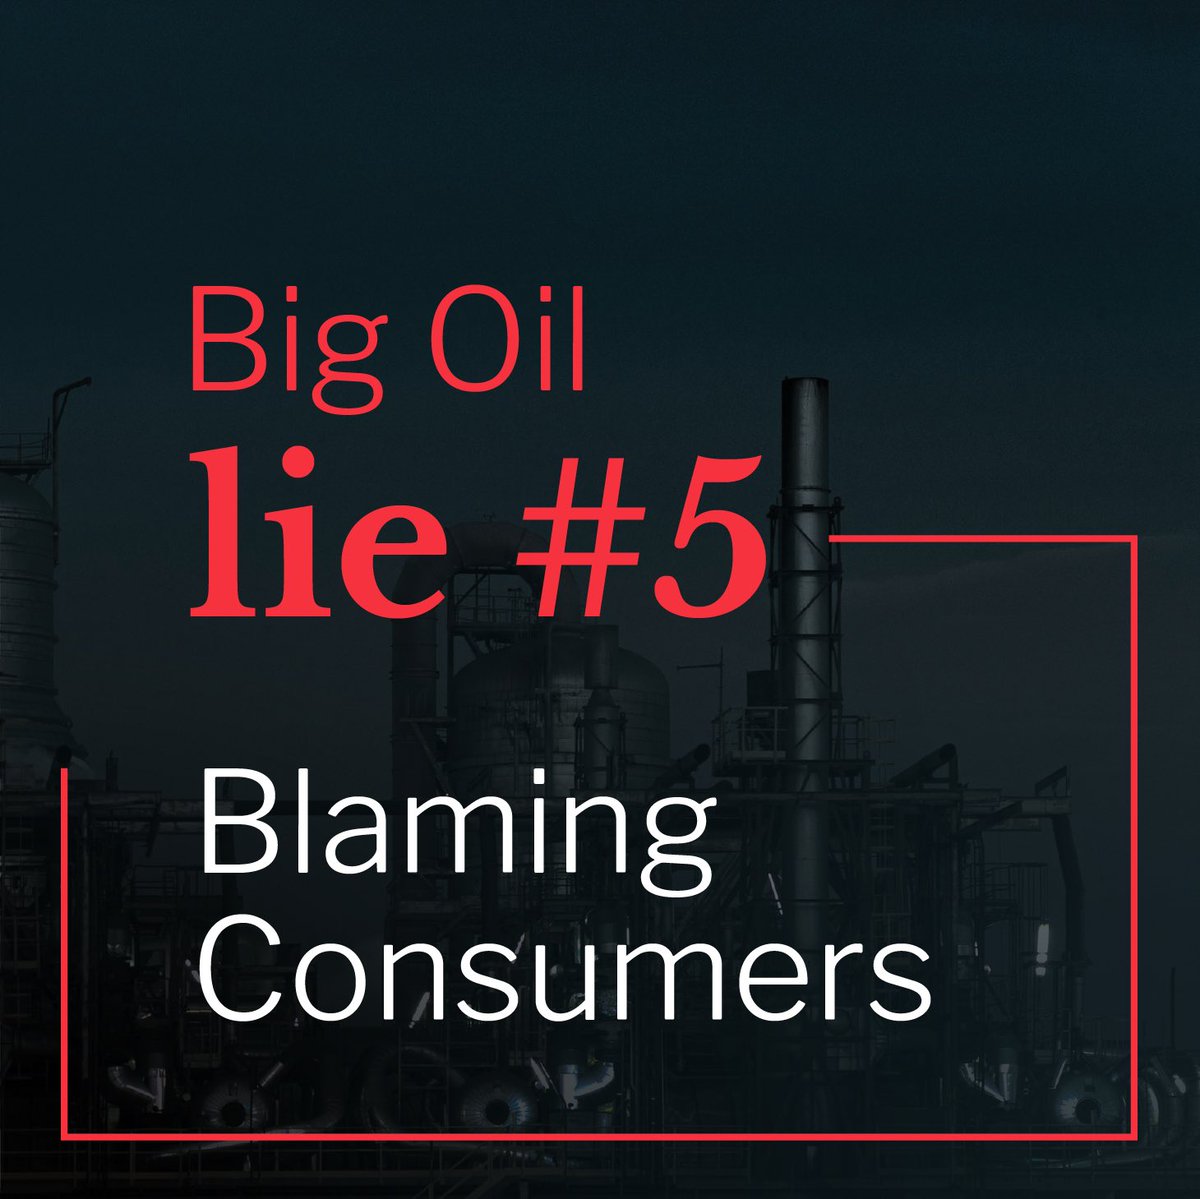 Lie #5: Individual consumers are personally responsible for causing — and solving — climate change. The reality: Oil companies consistently block energy alternatives and fight regulations in order to keep global markets and consumers dependent on oil and gas. #EarthDay